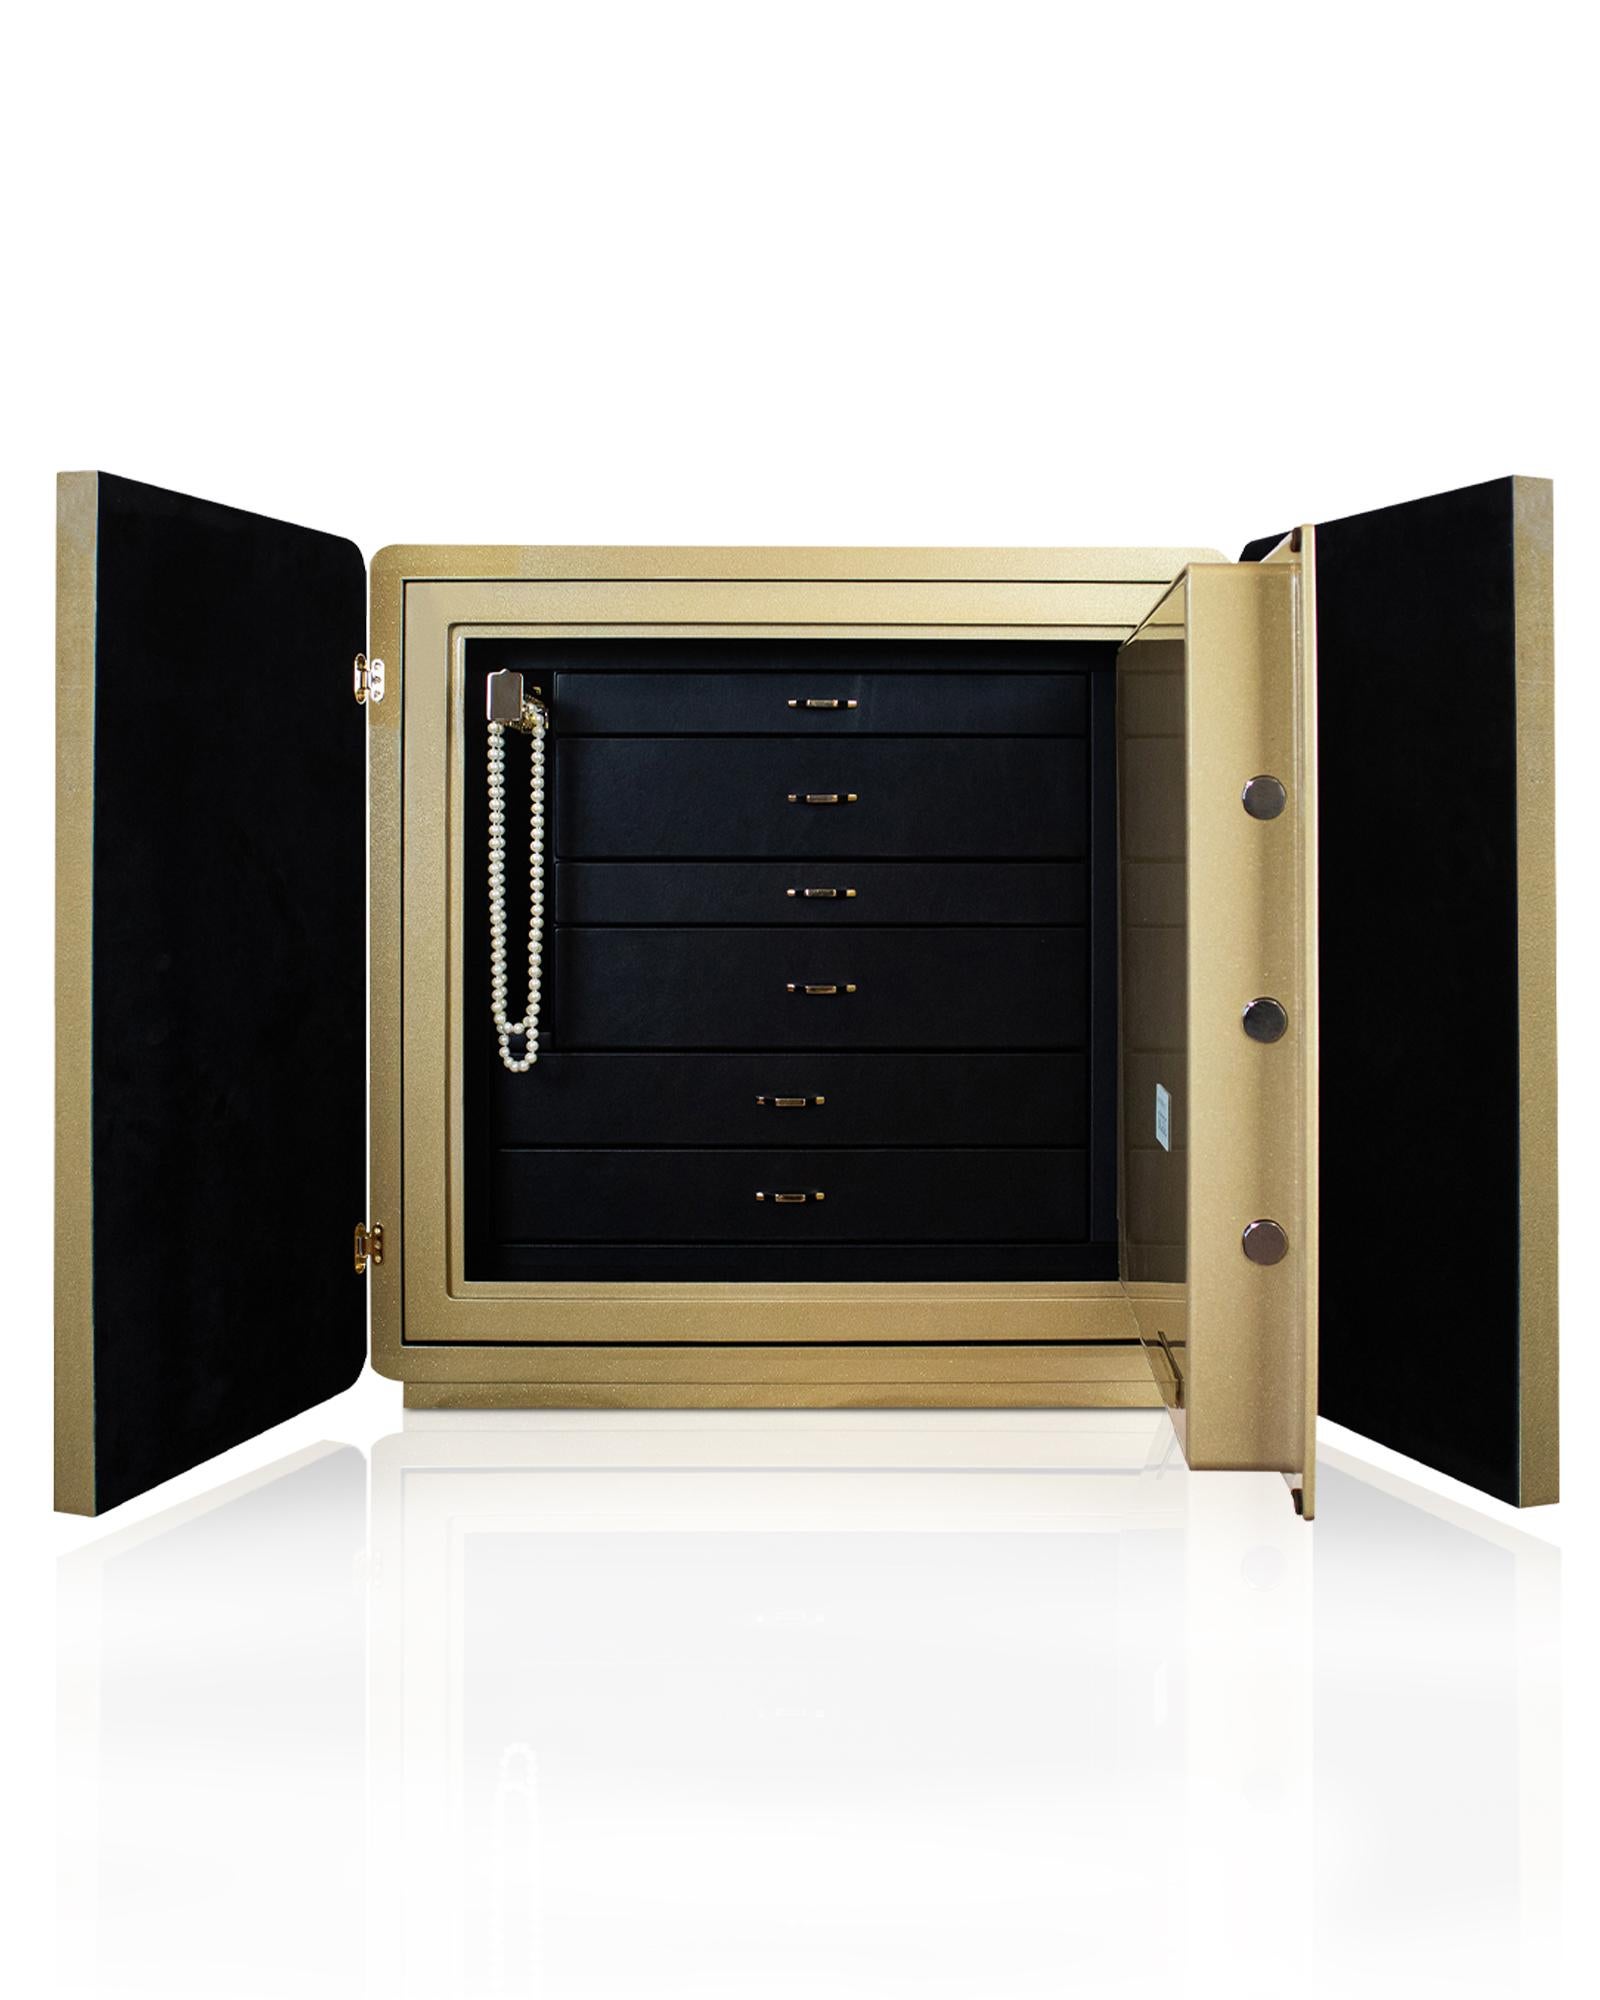 Armored jewelry cabinet covered in gold and black hand threaded leather. Varnished outside in
metallic gold color. Accessories in 24 karats gold plated brass. Drawers covered in black leather and inside lined with ultrasuede.
Inside a safe with